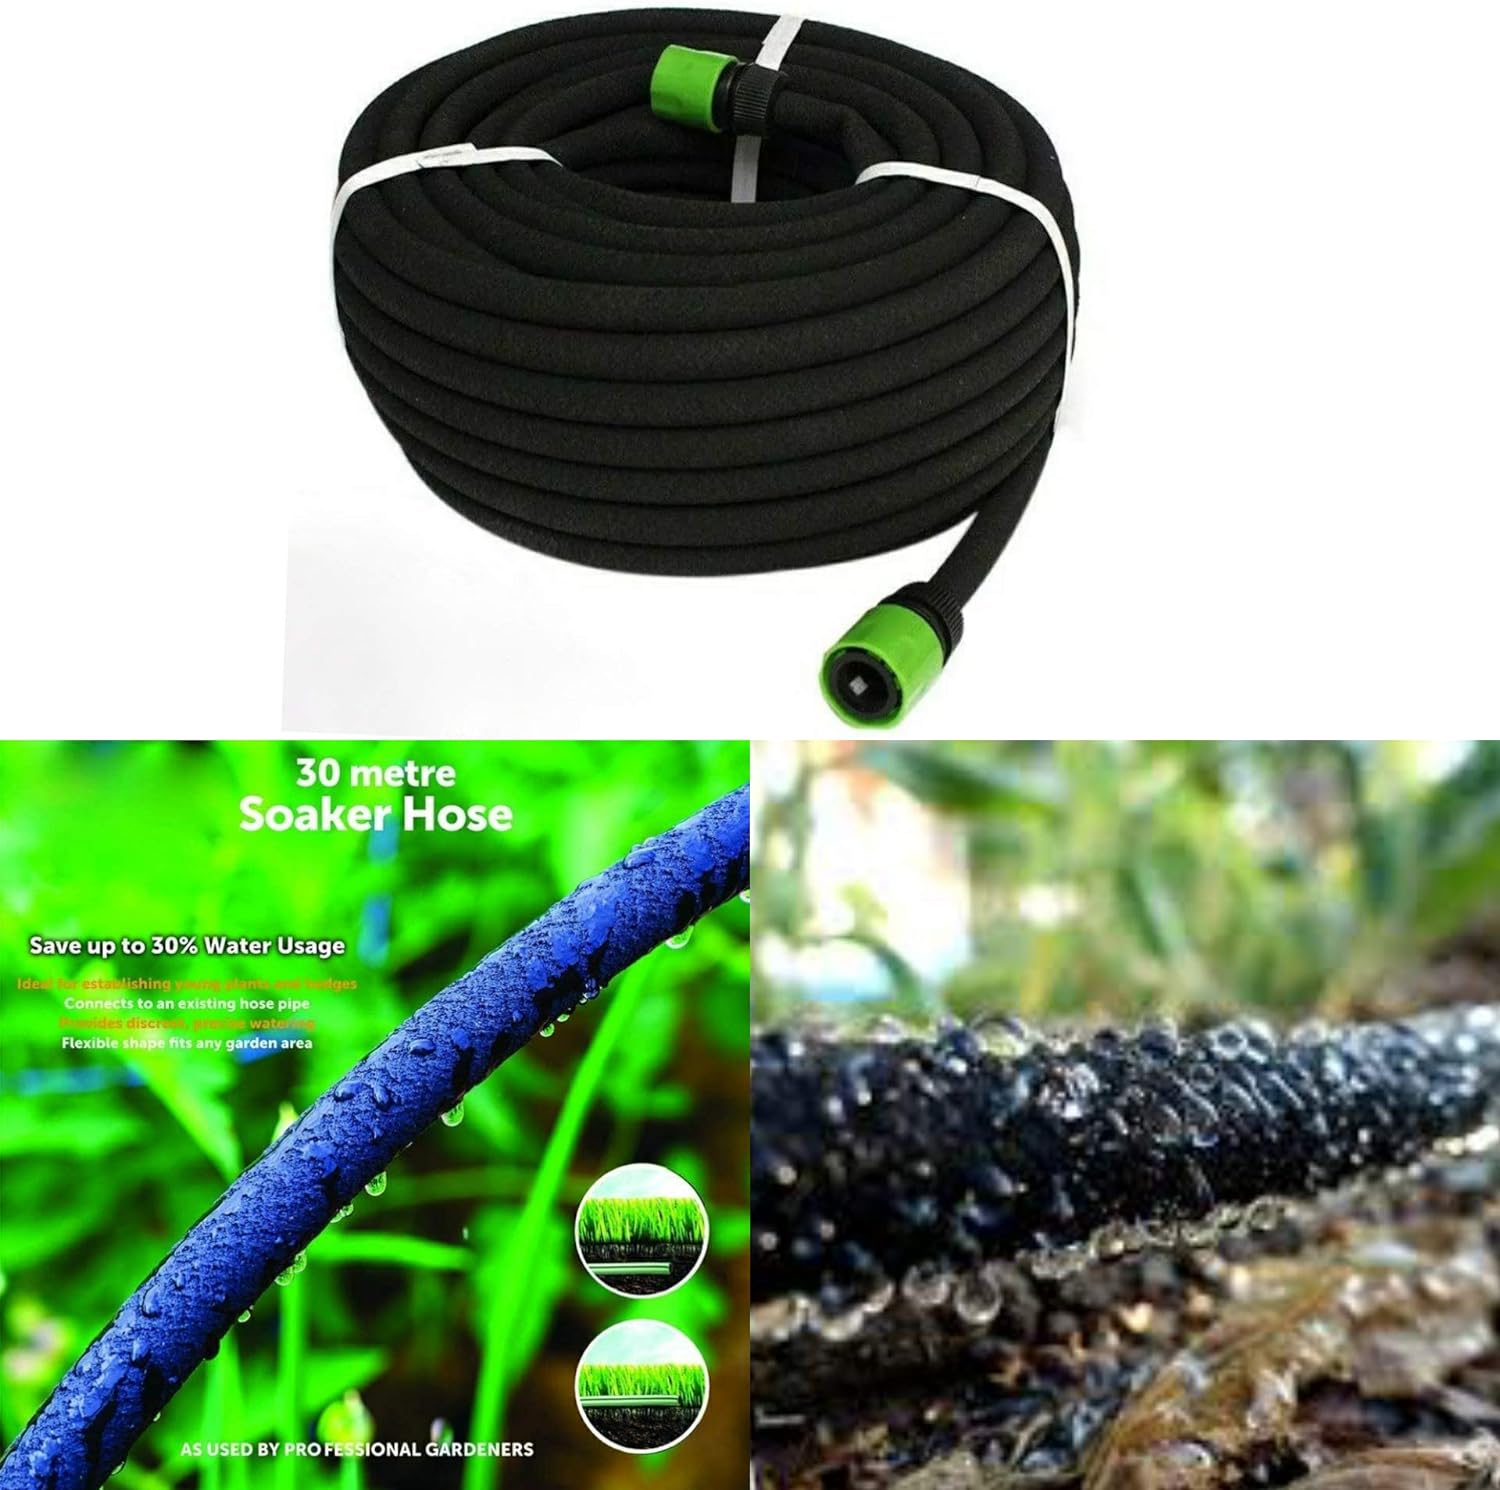 ADEPTNA 30 Metre Flexible Soaker Hose Pipe for Lawn Garden Watering Hose Irrigation Hose Watering Pipe – Fits any Garden Area